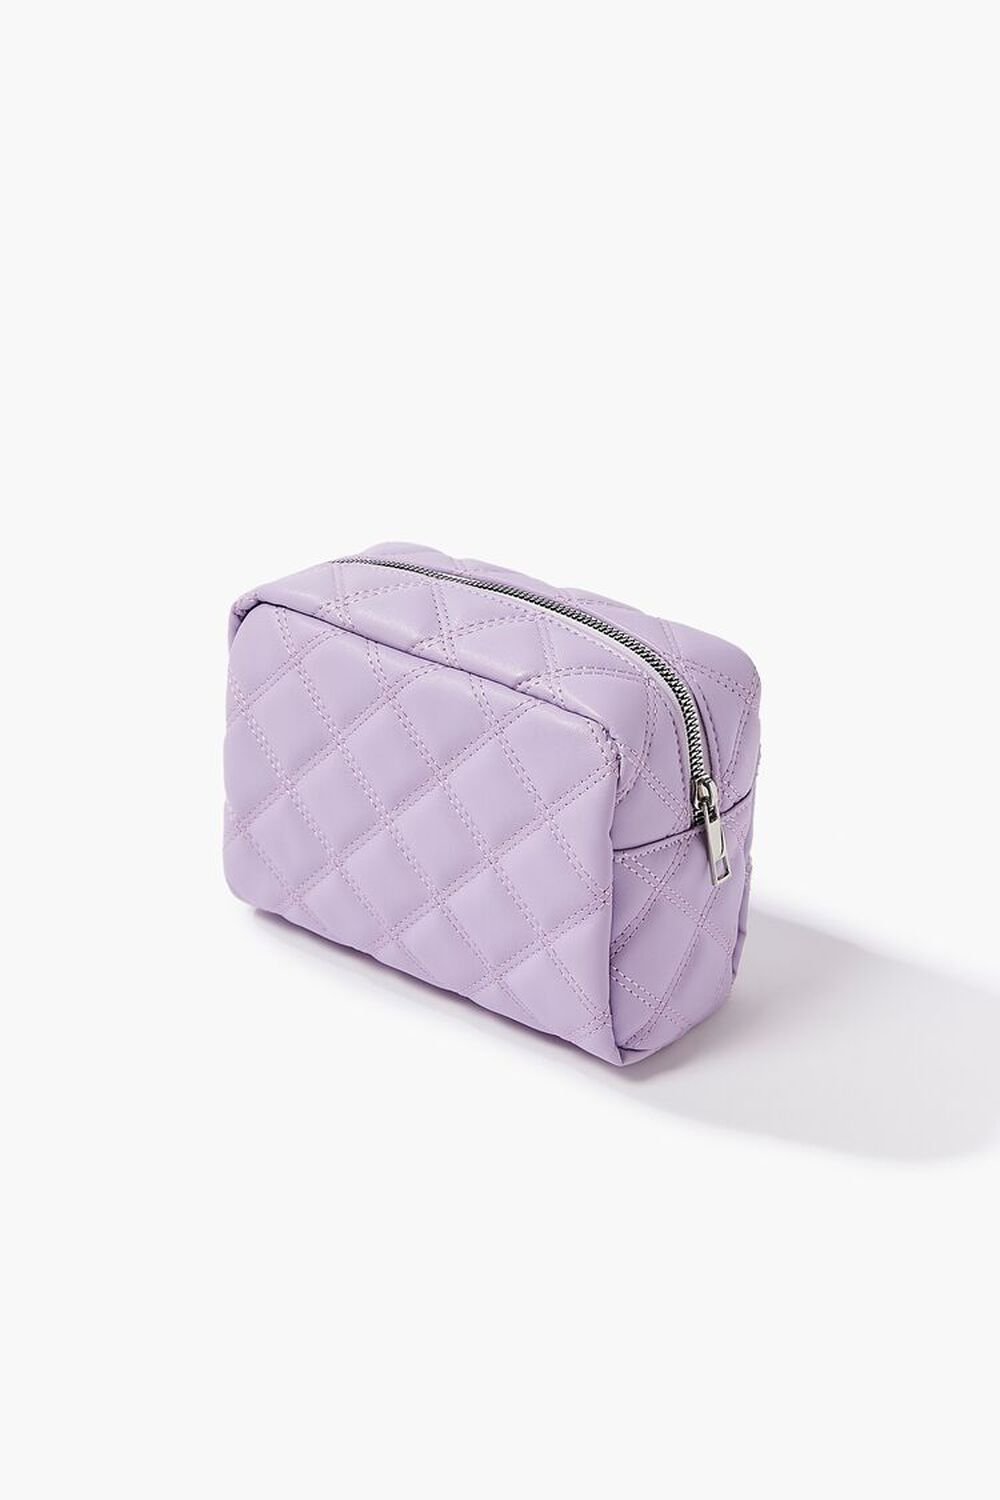 LAVENDER Quilted Faux Leather Makeup Bag, image 1